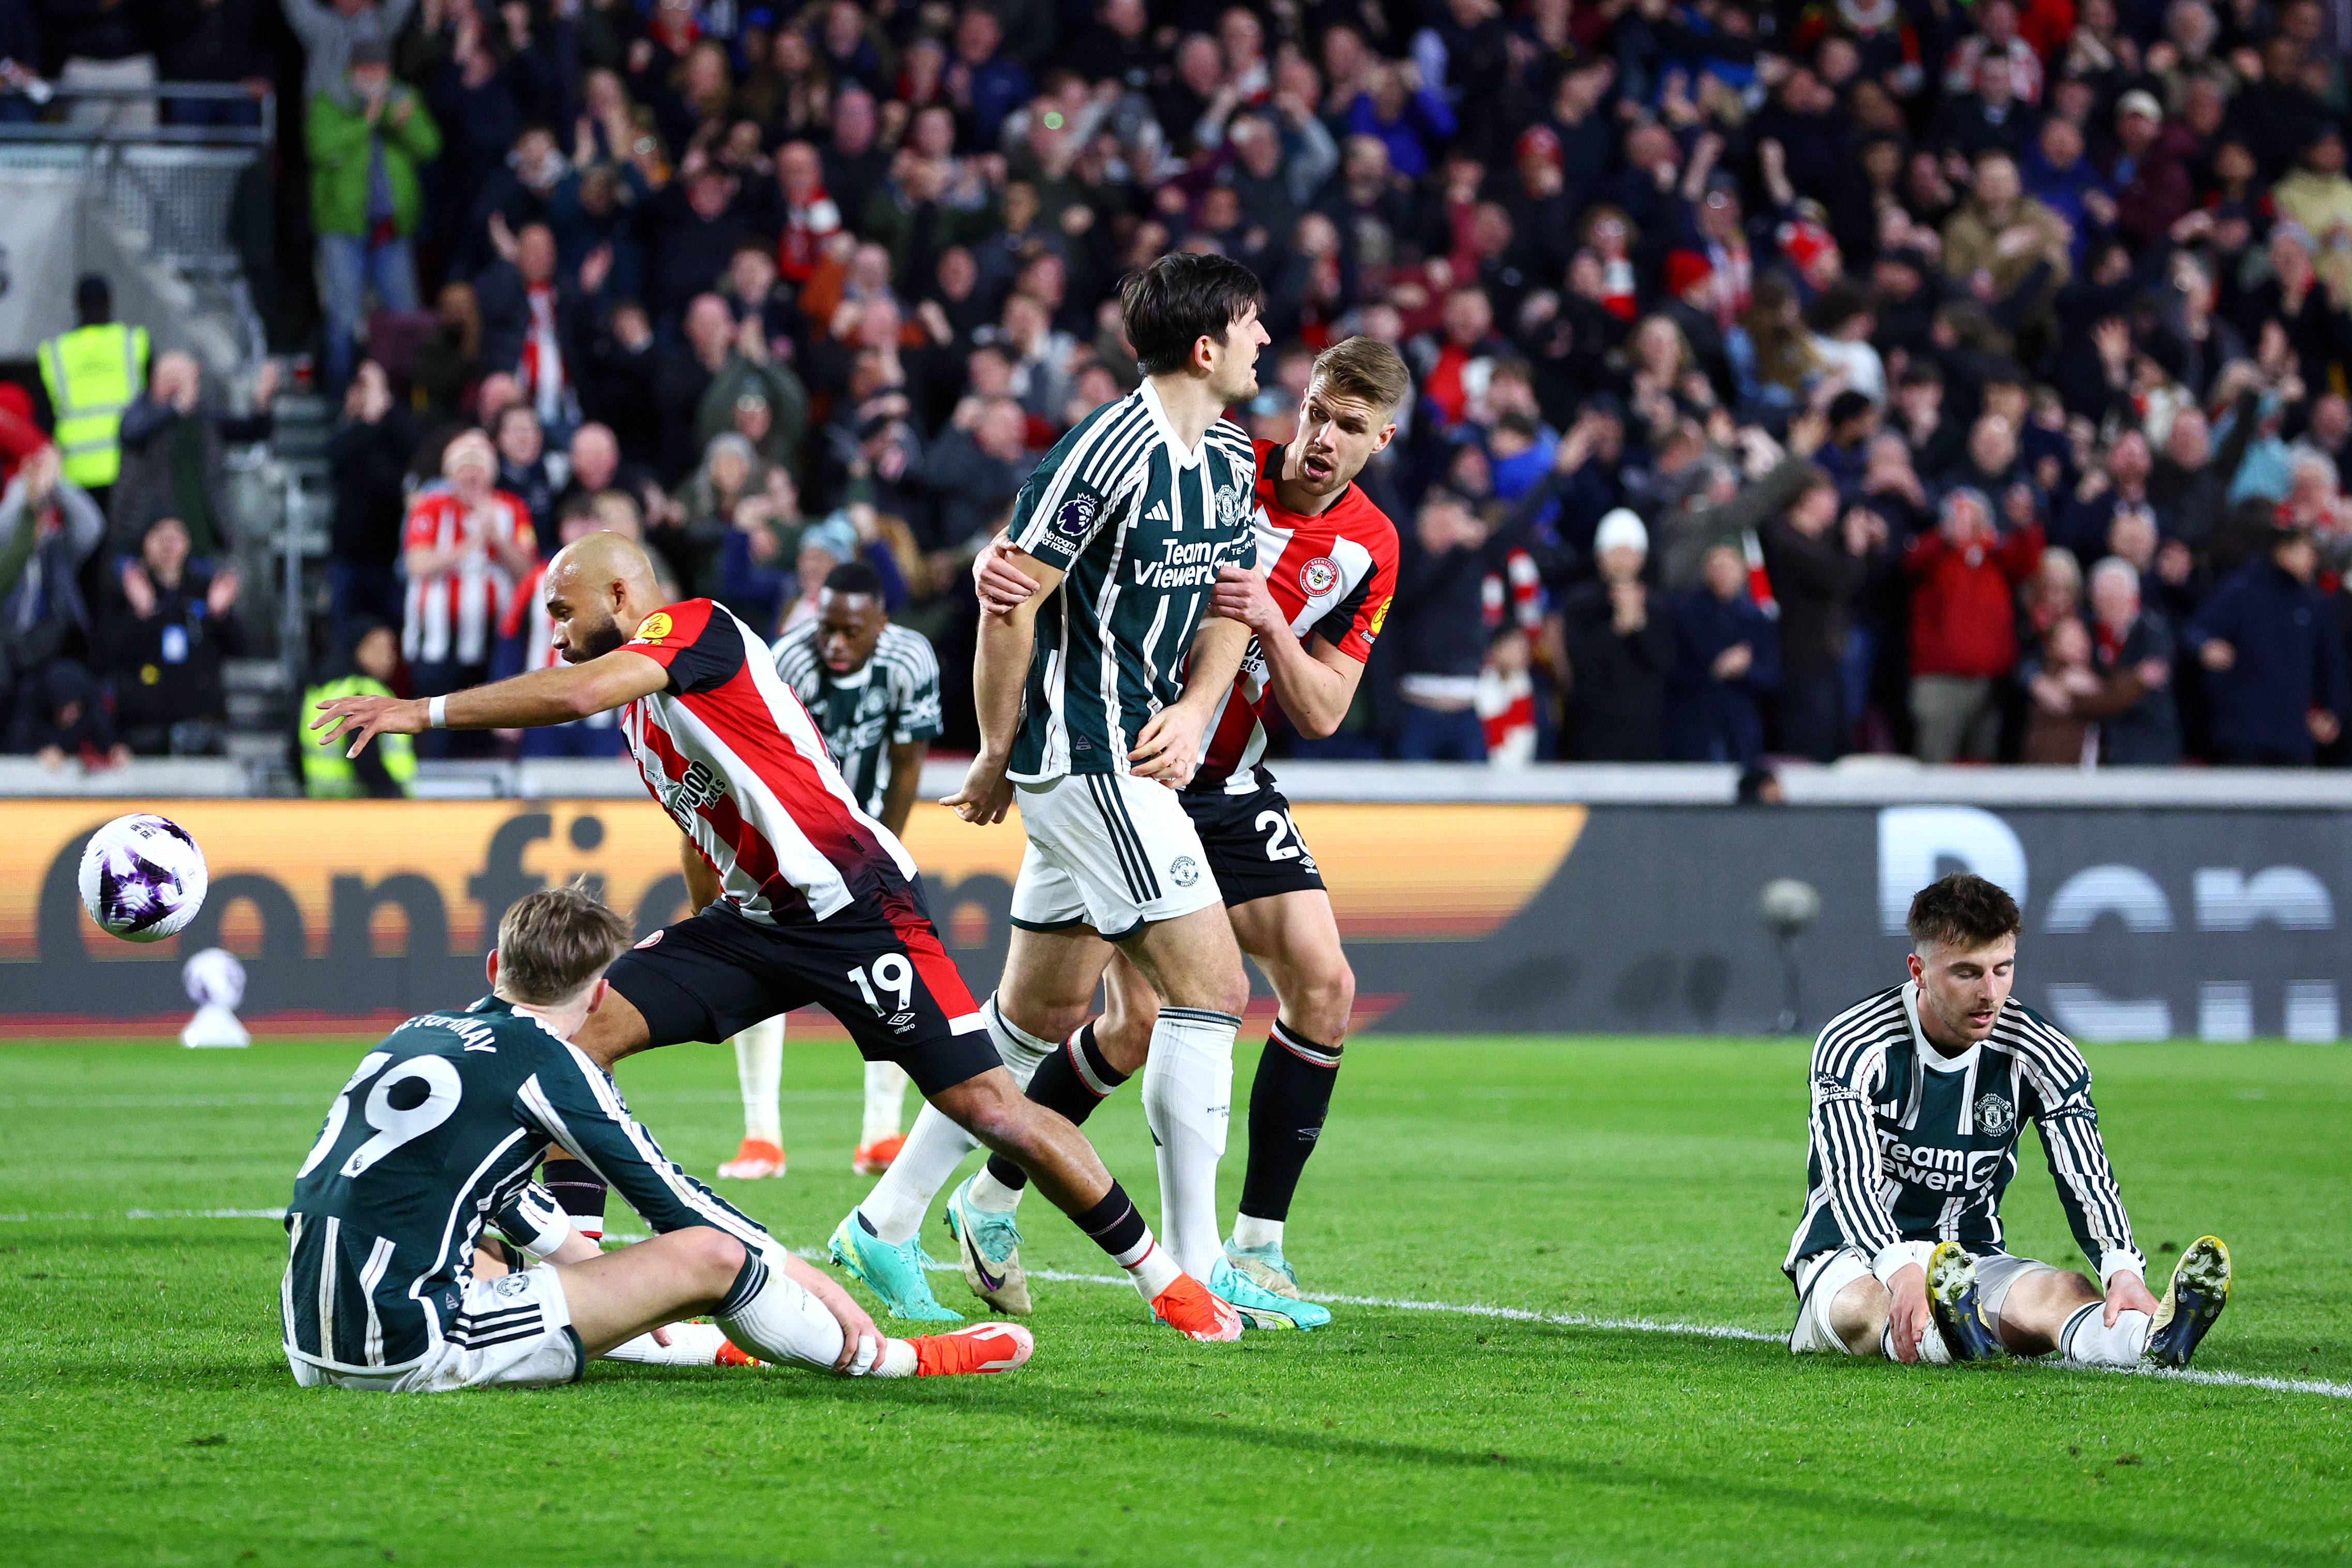 Man Utd conceded an injury time goal to Brentford that saw them drop two points on the road